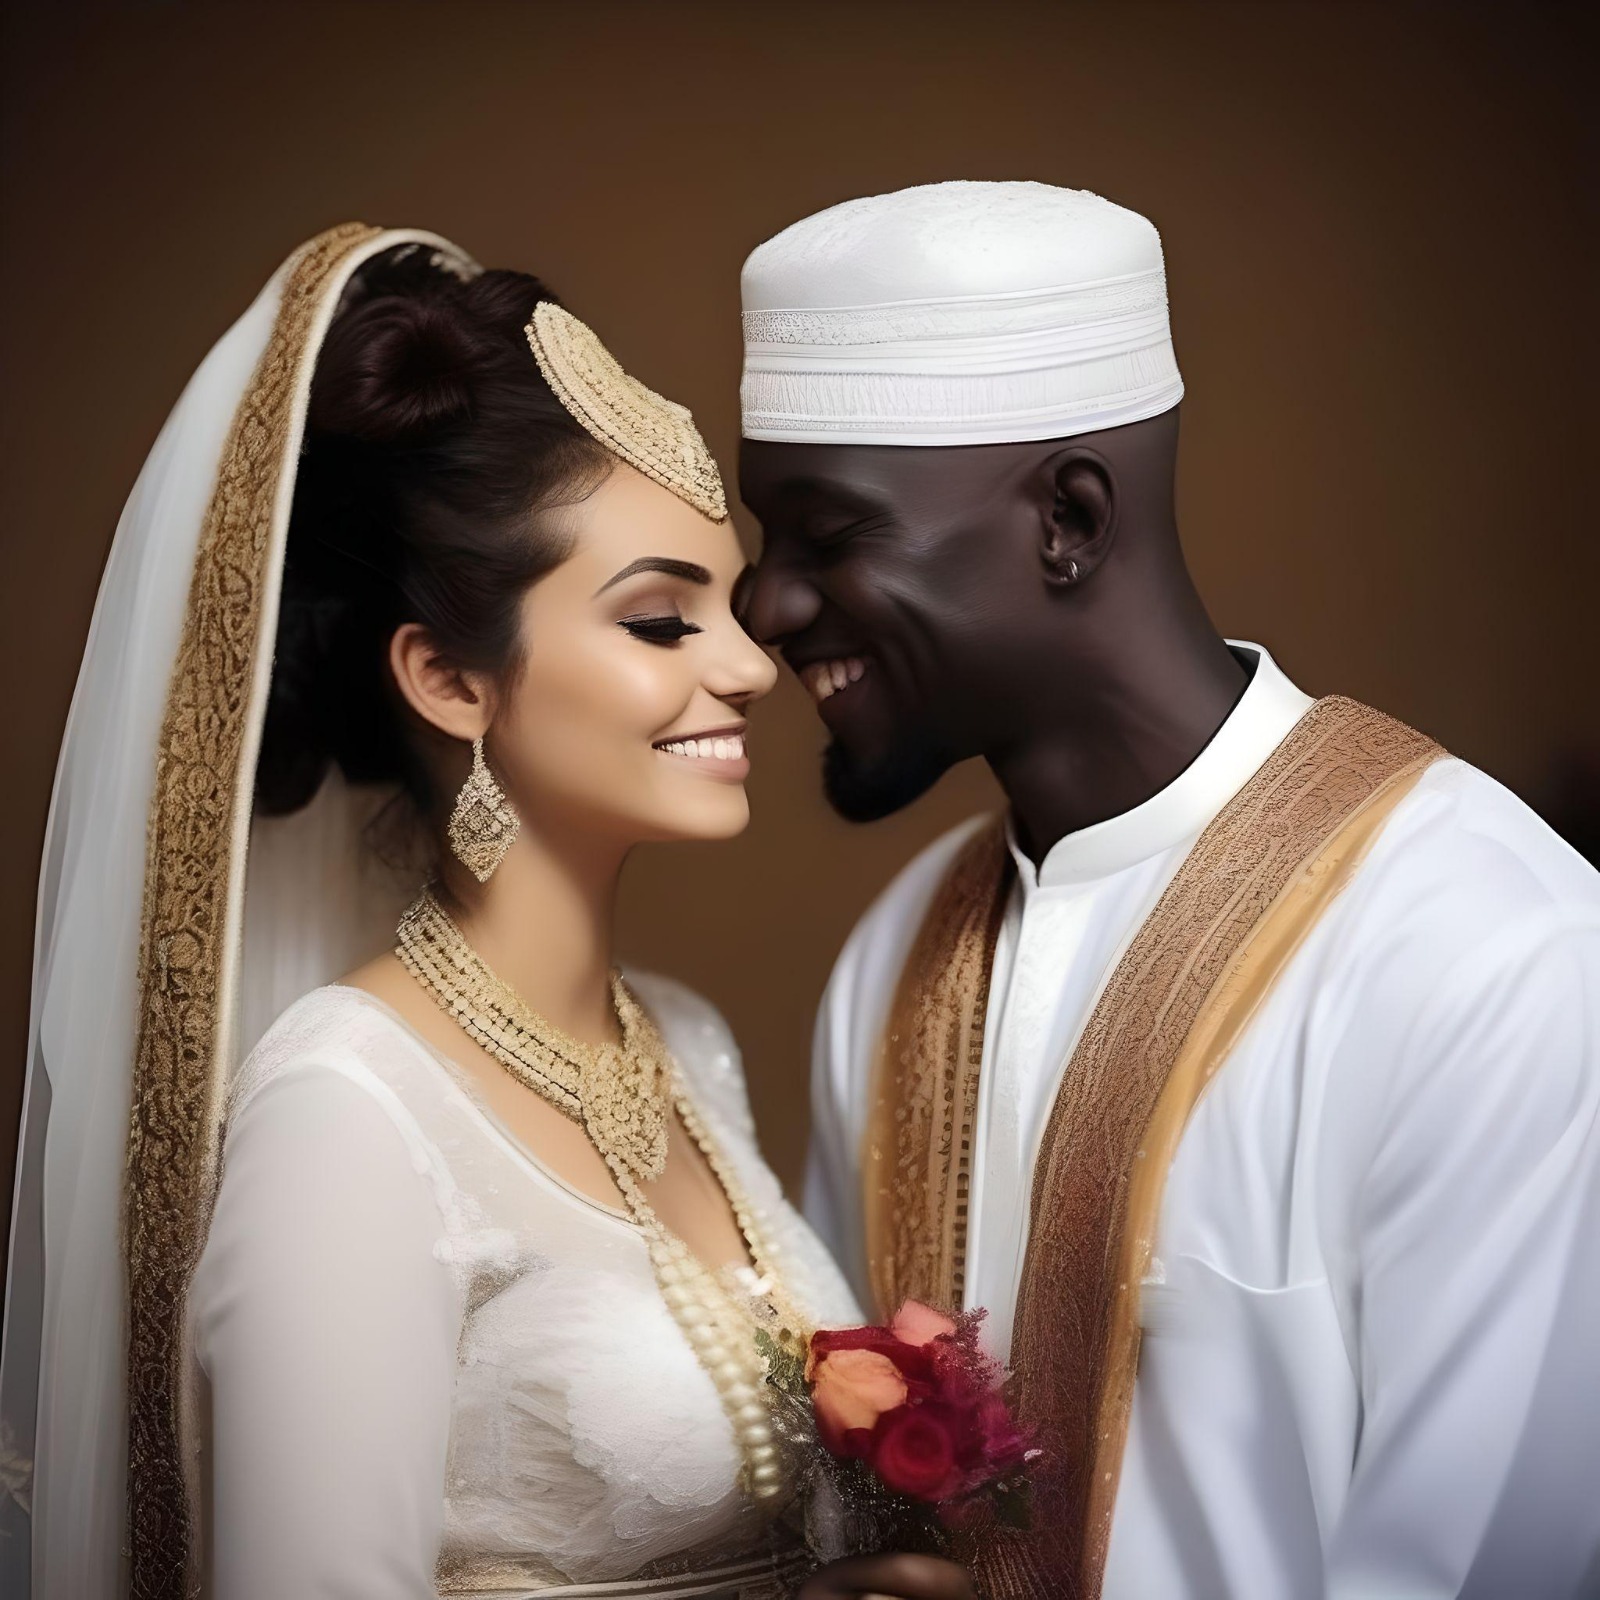  Picture of Marriage between two different race couples.